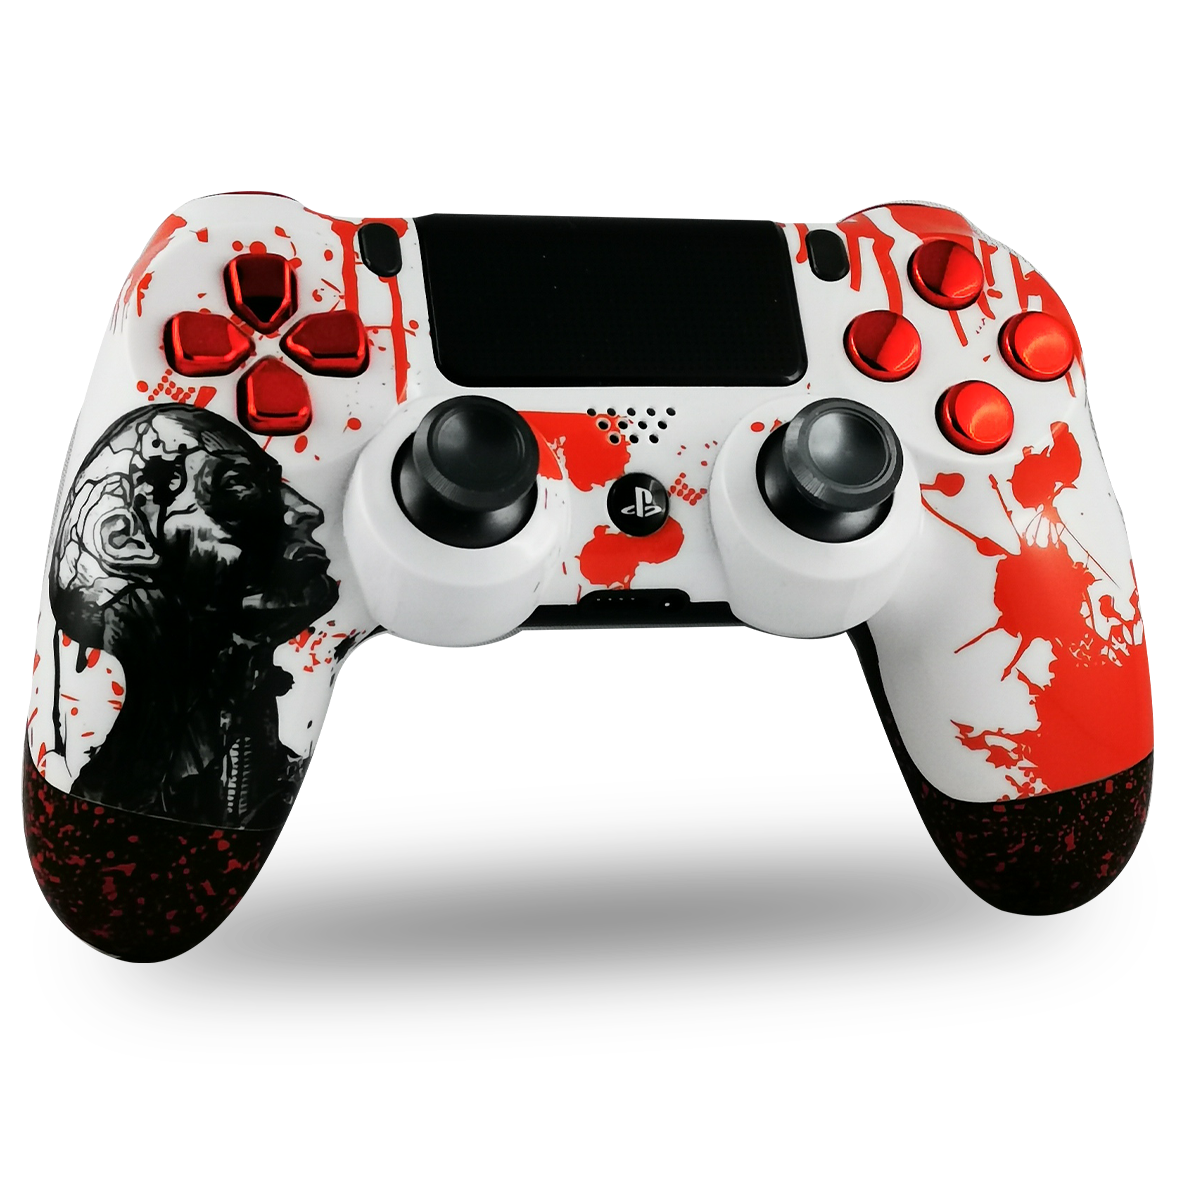 manette-PS4-custom-playstation-4-sony-personnalisee-drawmypad-Blood